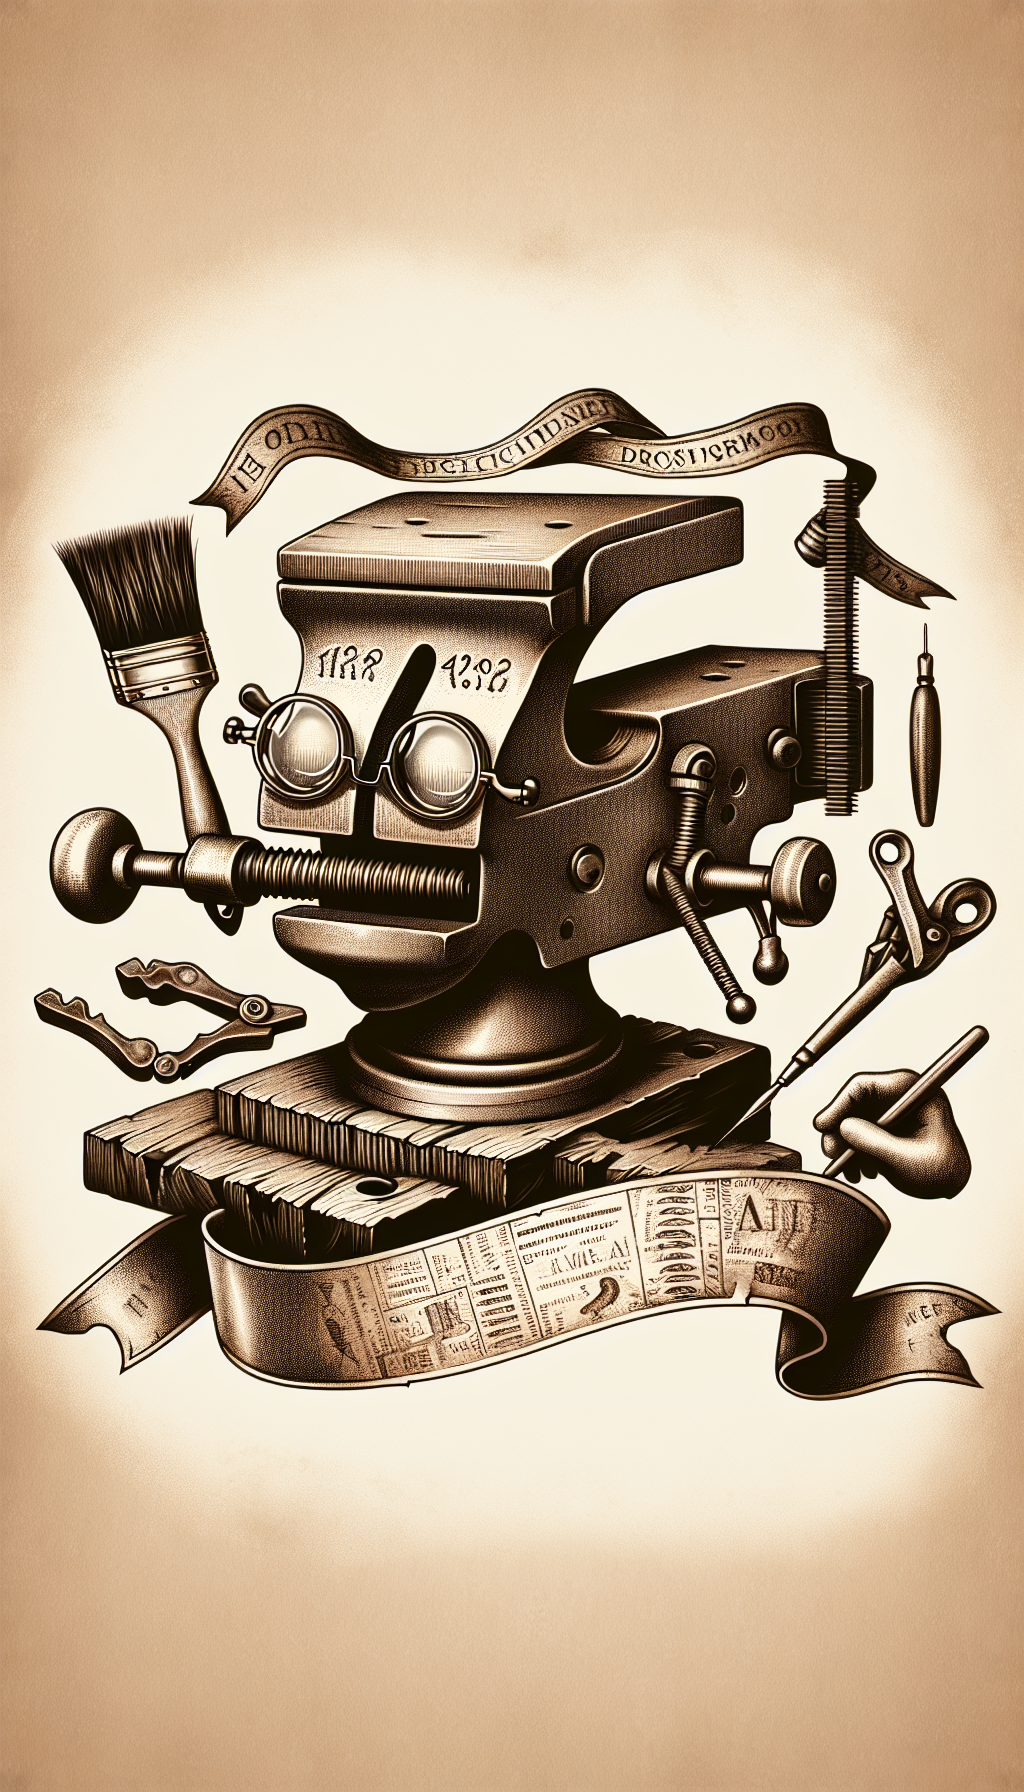 A sepia-toned illustration depicts an anthropomorphized, wise old vise, adorned with reading glasses, holding an archival brush and a magnifying glass. A ribbon unfurls beneath it featuring engravings of distinct vintage vise make-and-model markers. Around the vise, tiny mechanical hands gently restore its surfaces, symbolizing preservation, while faded inscriptions imply the mystery of identifying its storied past.